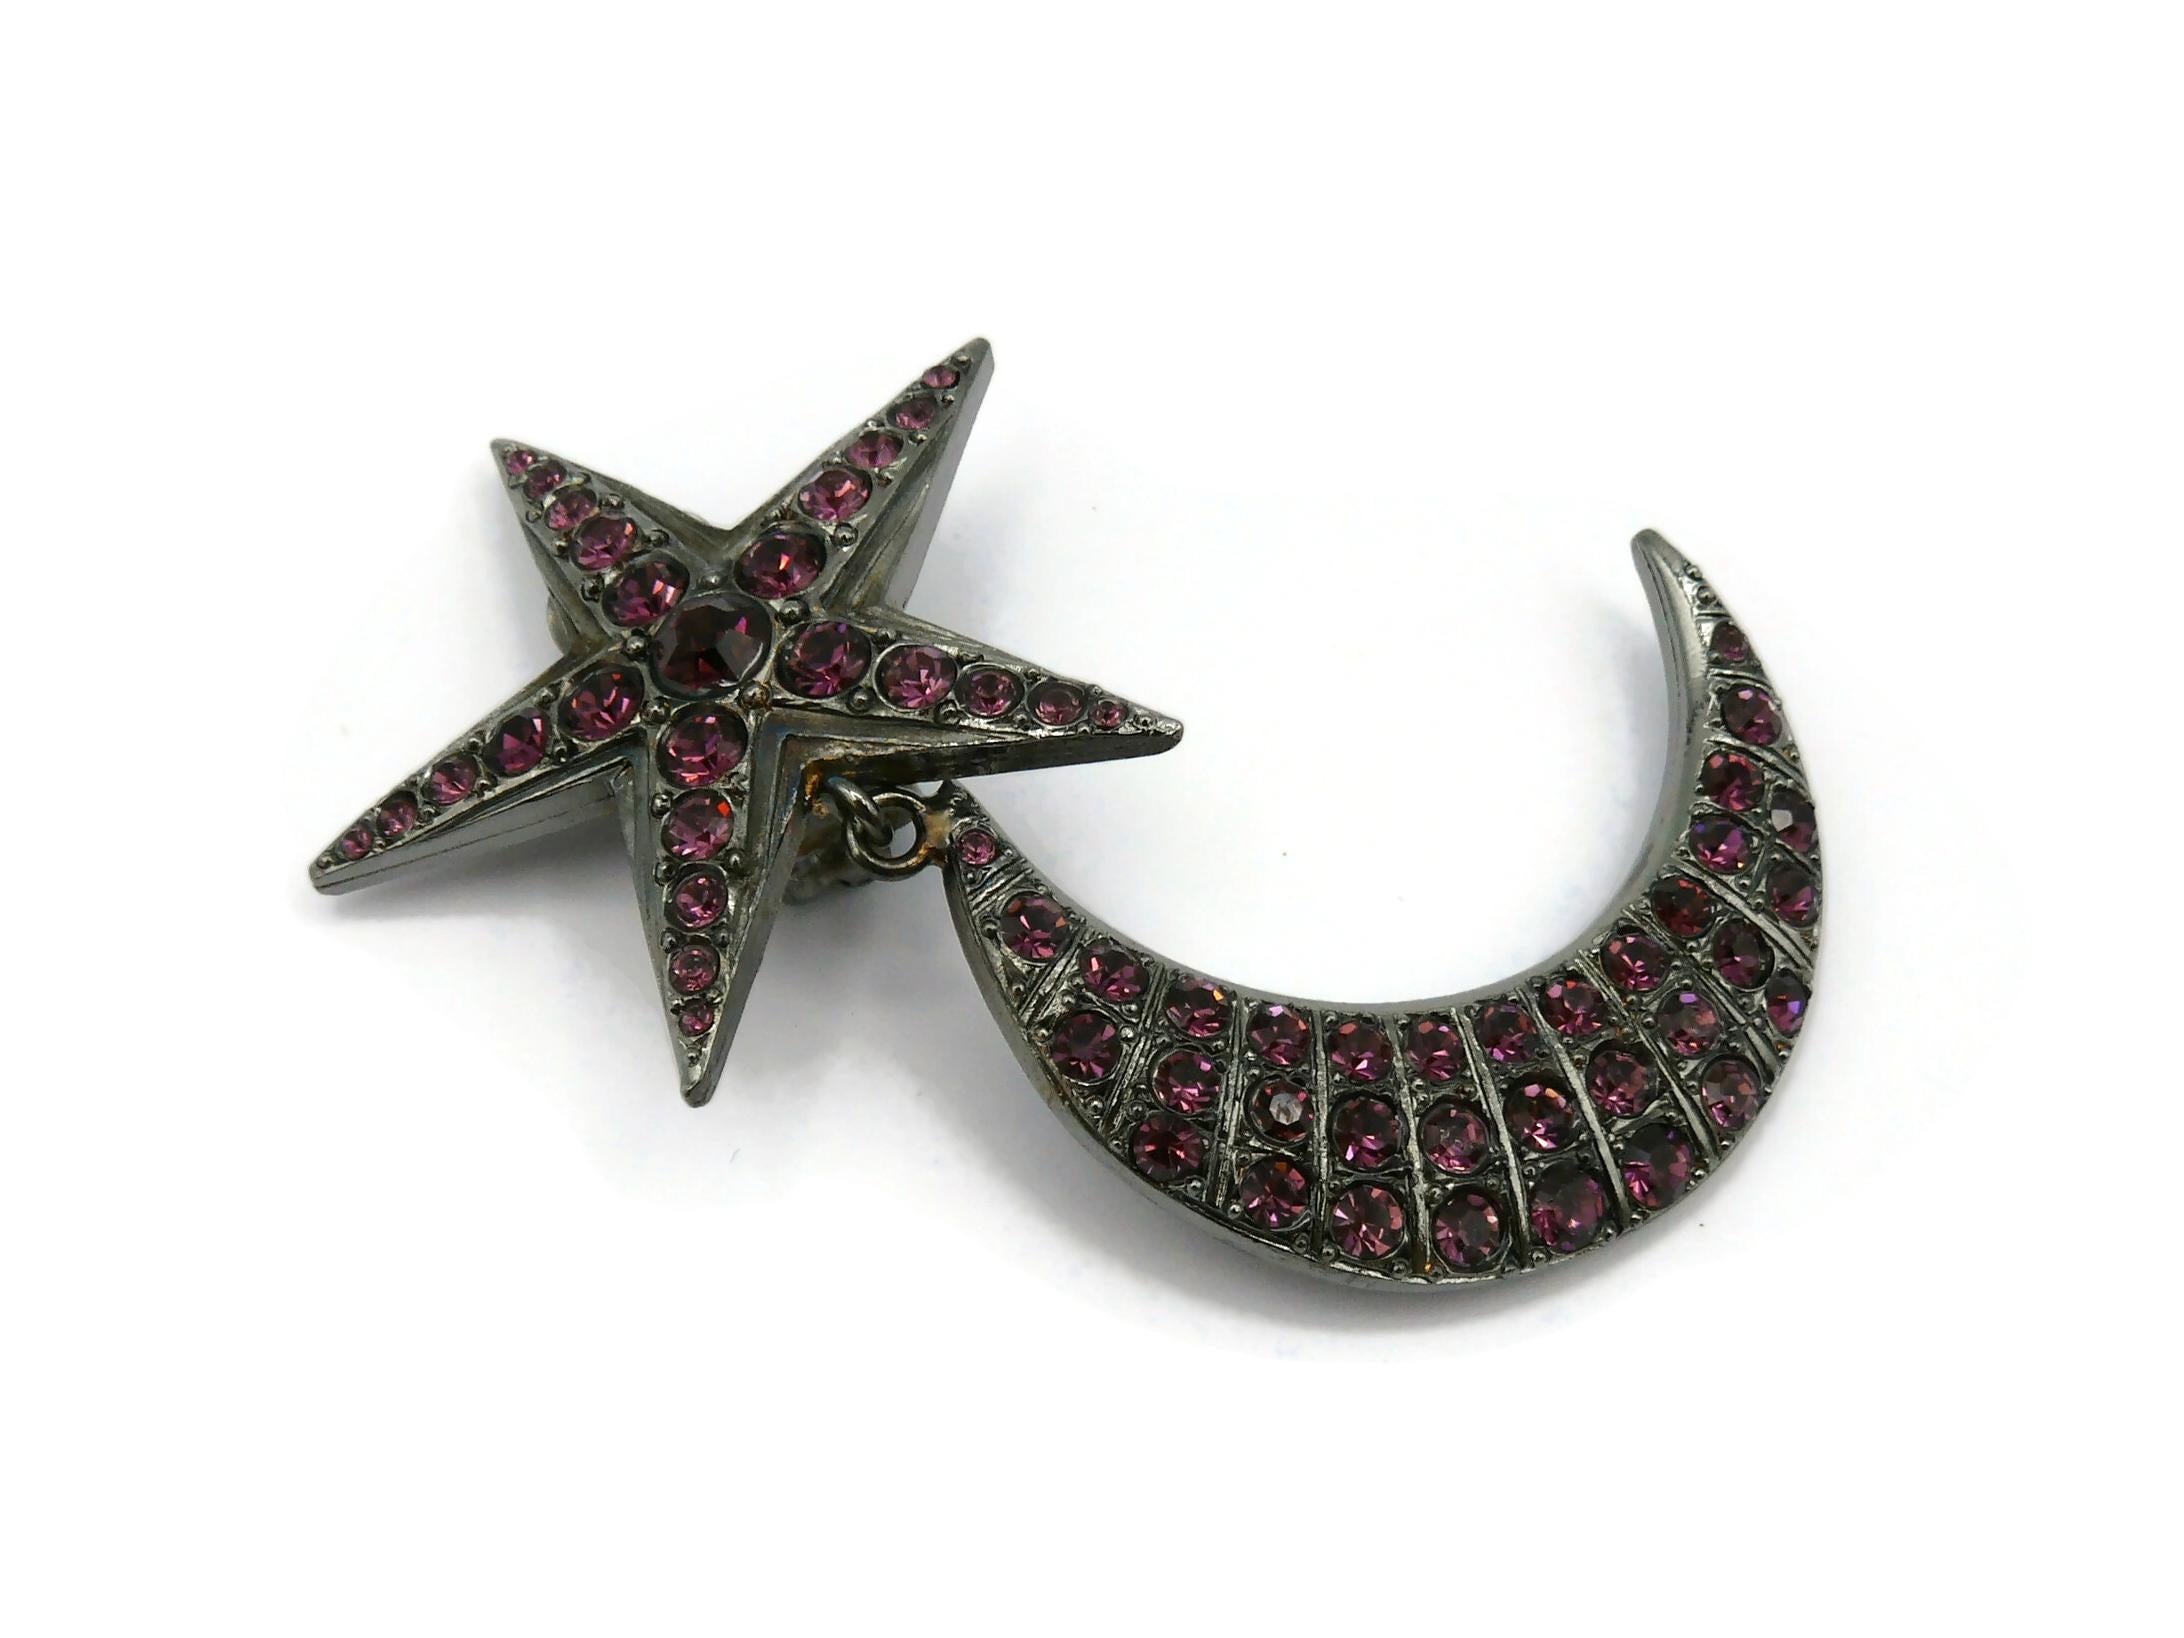 JEAN PAUL GAULTIER Vintage Jewelled Star and Crescent Moon Dangling Earrings For Sale 3